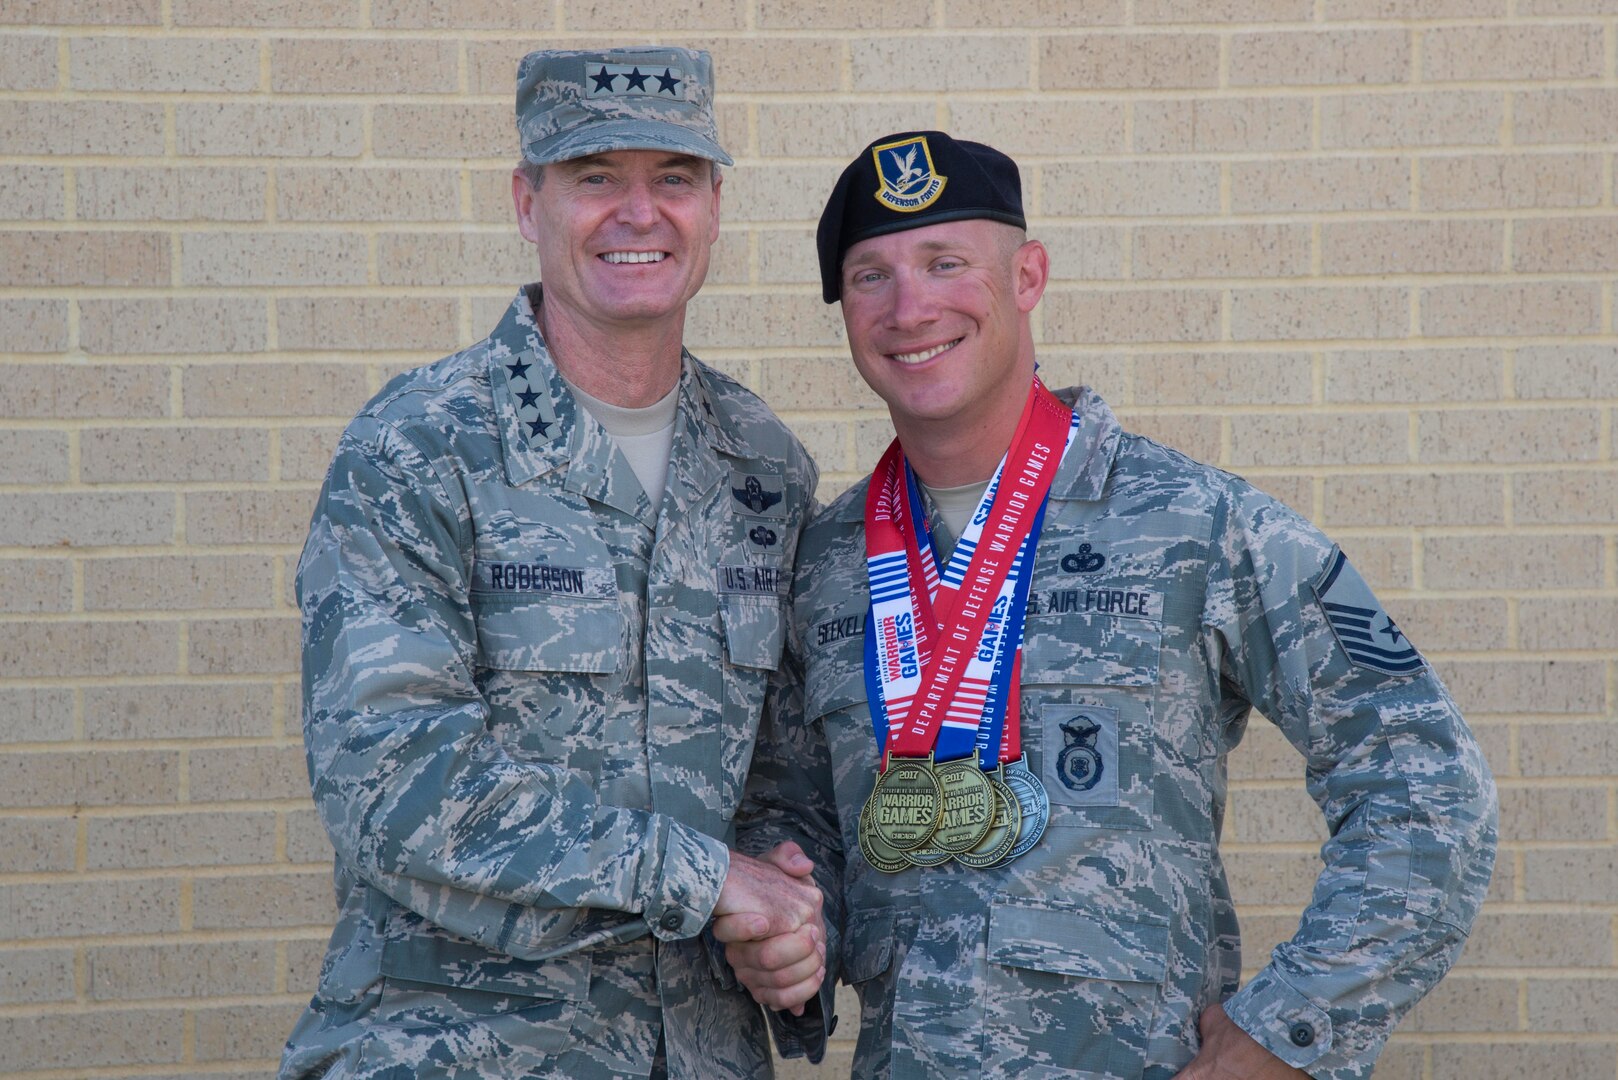 Master Sgt. Benjamin Seekell, a 343rd Training Squadron security forces instructor, received a warm welcome from a familiar face from his 2011 Afghanistan deployment: Lt. Gen. Darryl Roberson, commander of Air Education and Training Command. Seekell recently returned back to Joint Base San Antonio-Lackland from the 2017 Department of Defense Warrior Games having earned eight medals.